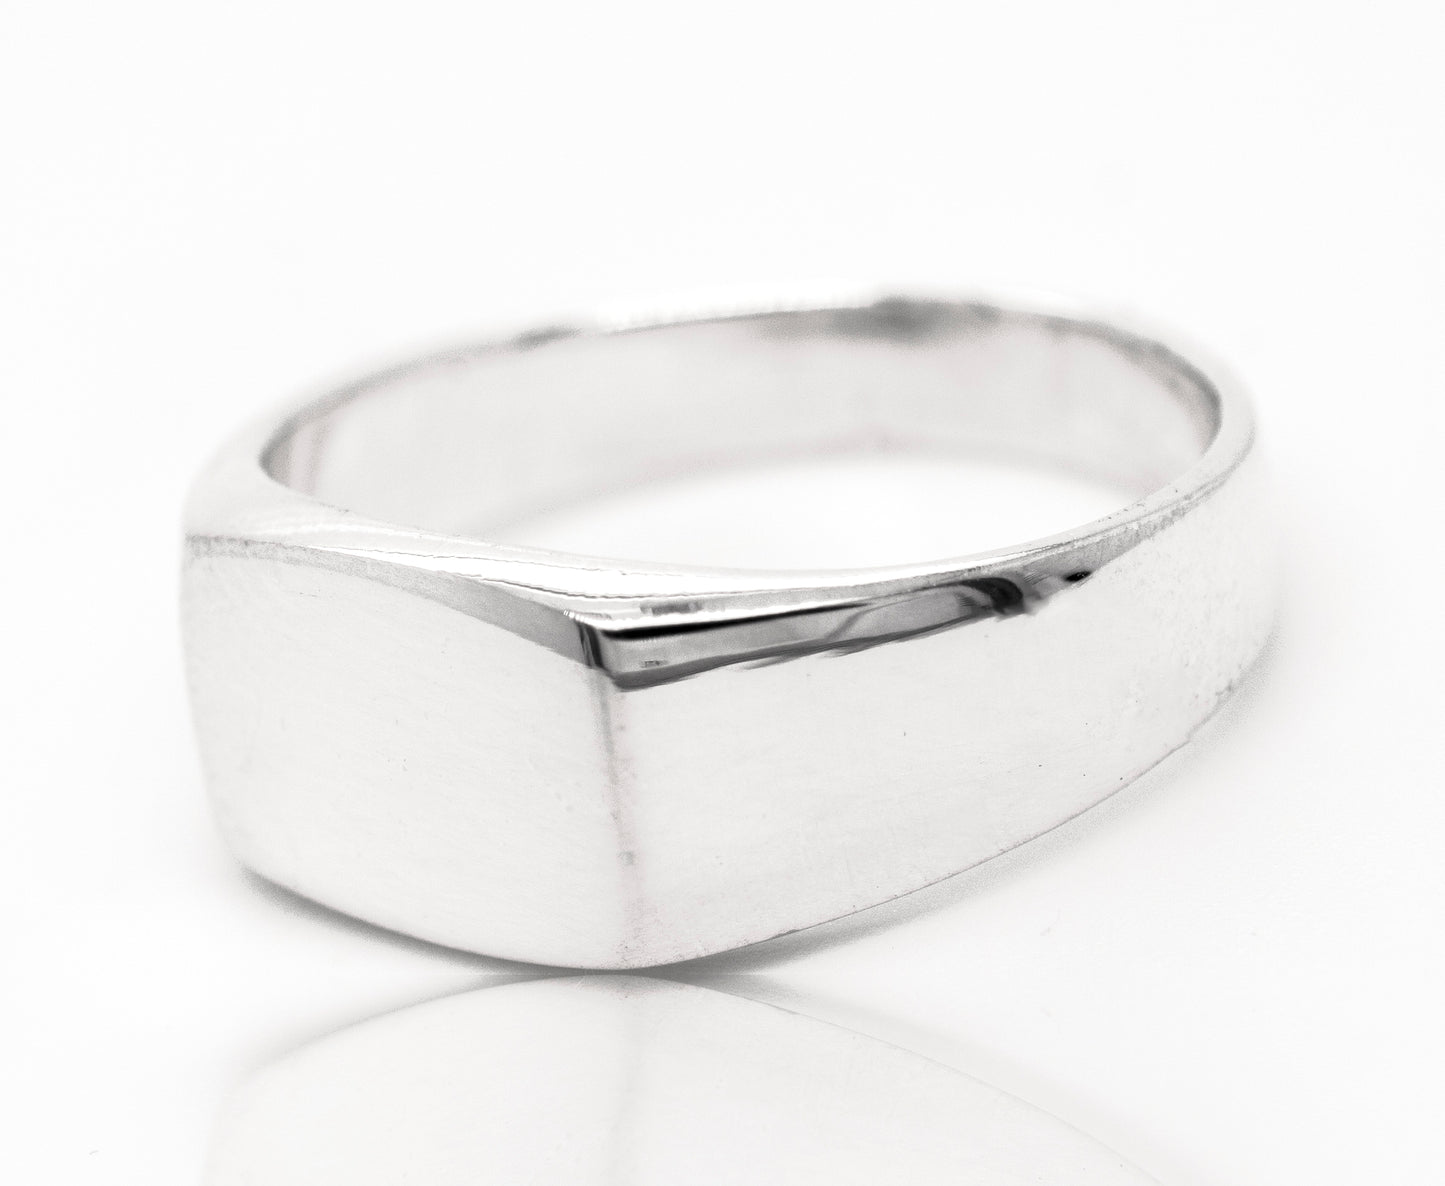 A sterling silver rectangular signet ring with engraving on a white surface.